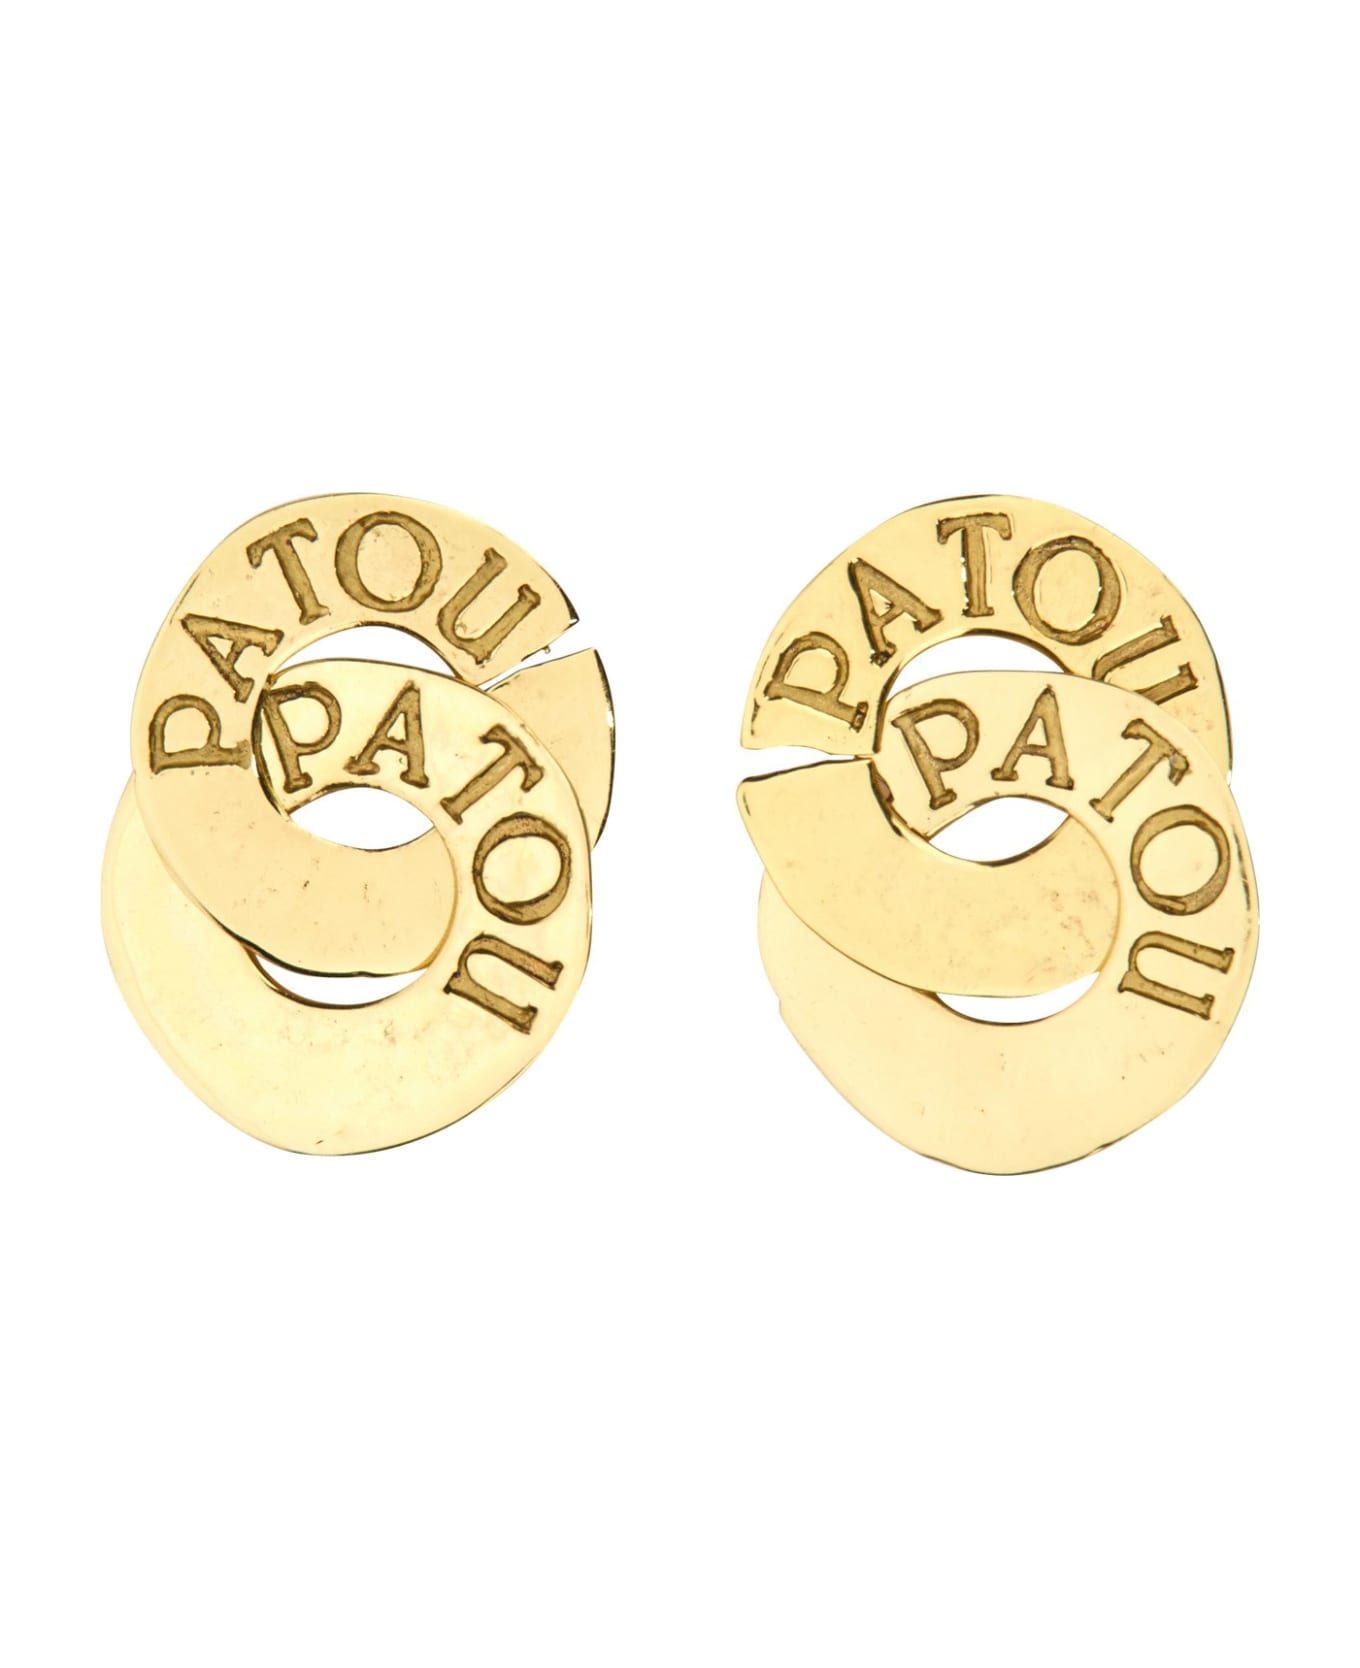 Patou Double Coin Earrings - G Gold